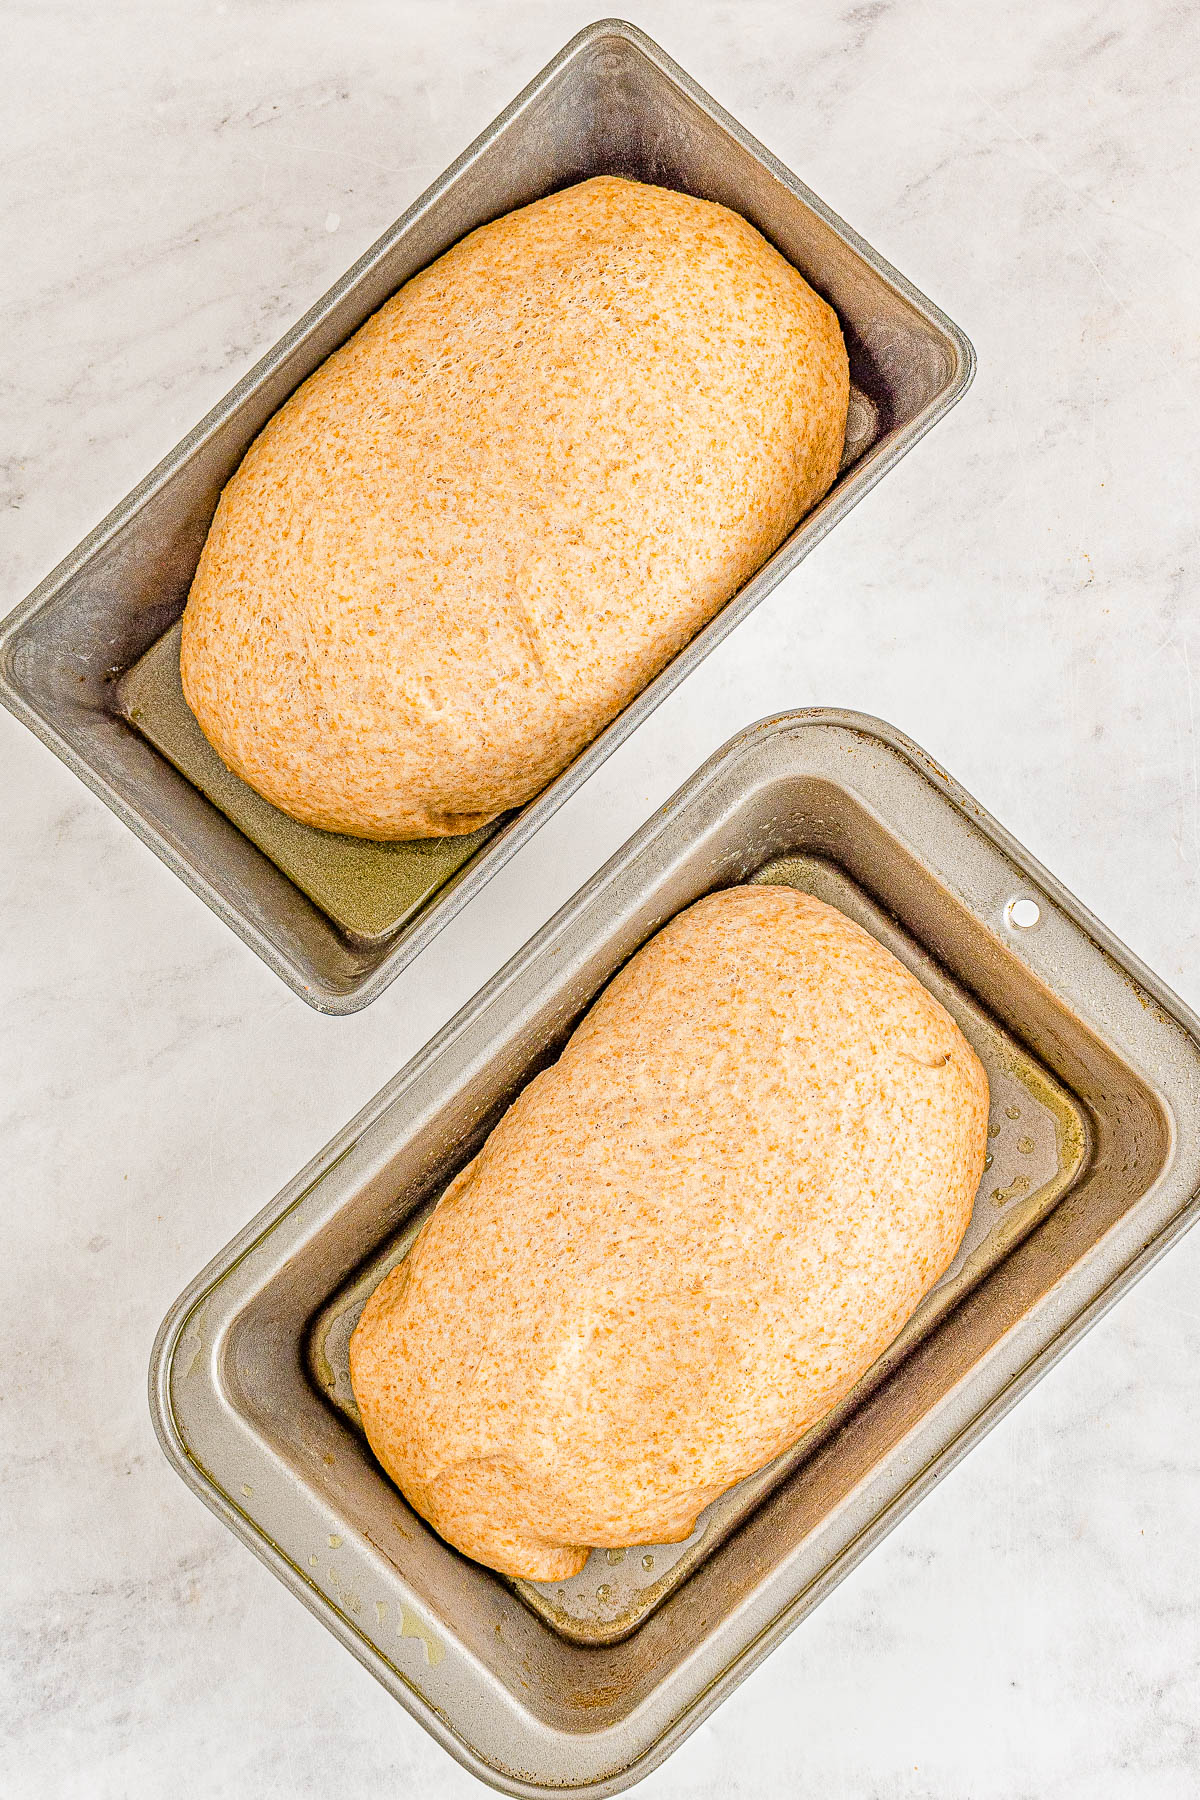 Honey Whole Wheat Bread - An EASY and foolproof homemade bread recipe for honey sweetened whole wheat bread! It's soft, thick, and scrumptious! Serve it plain, toast it, make sandwiches with it, or serve it with honey butter which is my favorite! Even if you're never made bread before, my recipe is straightforward and do-able!